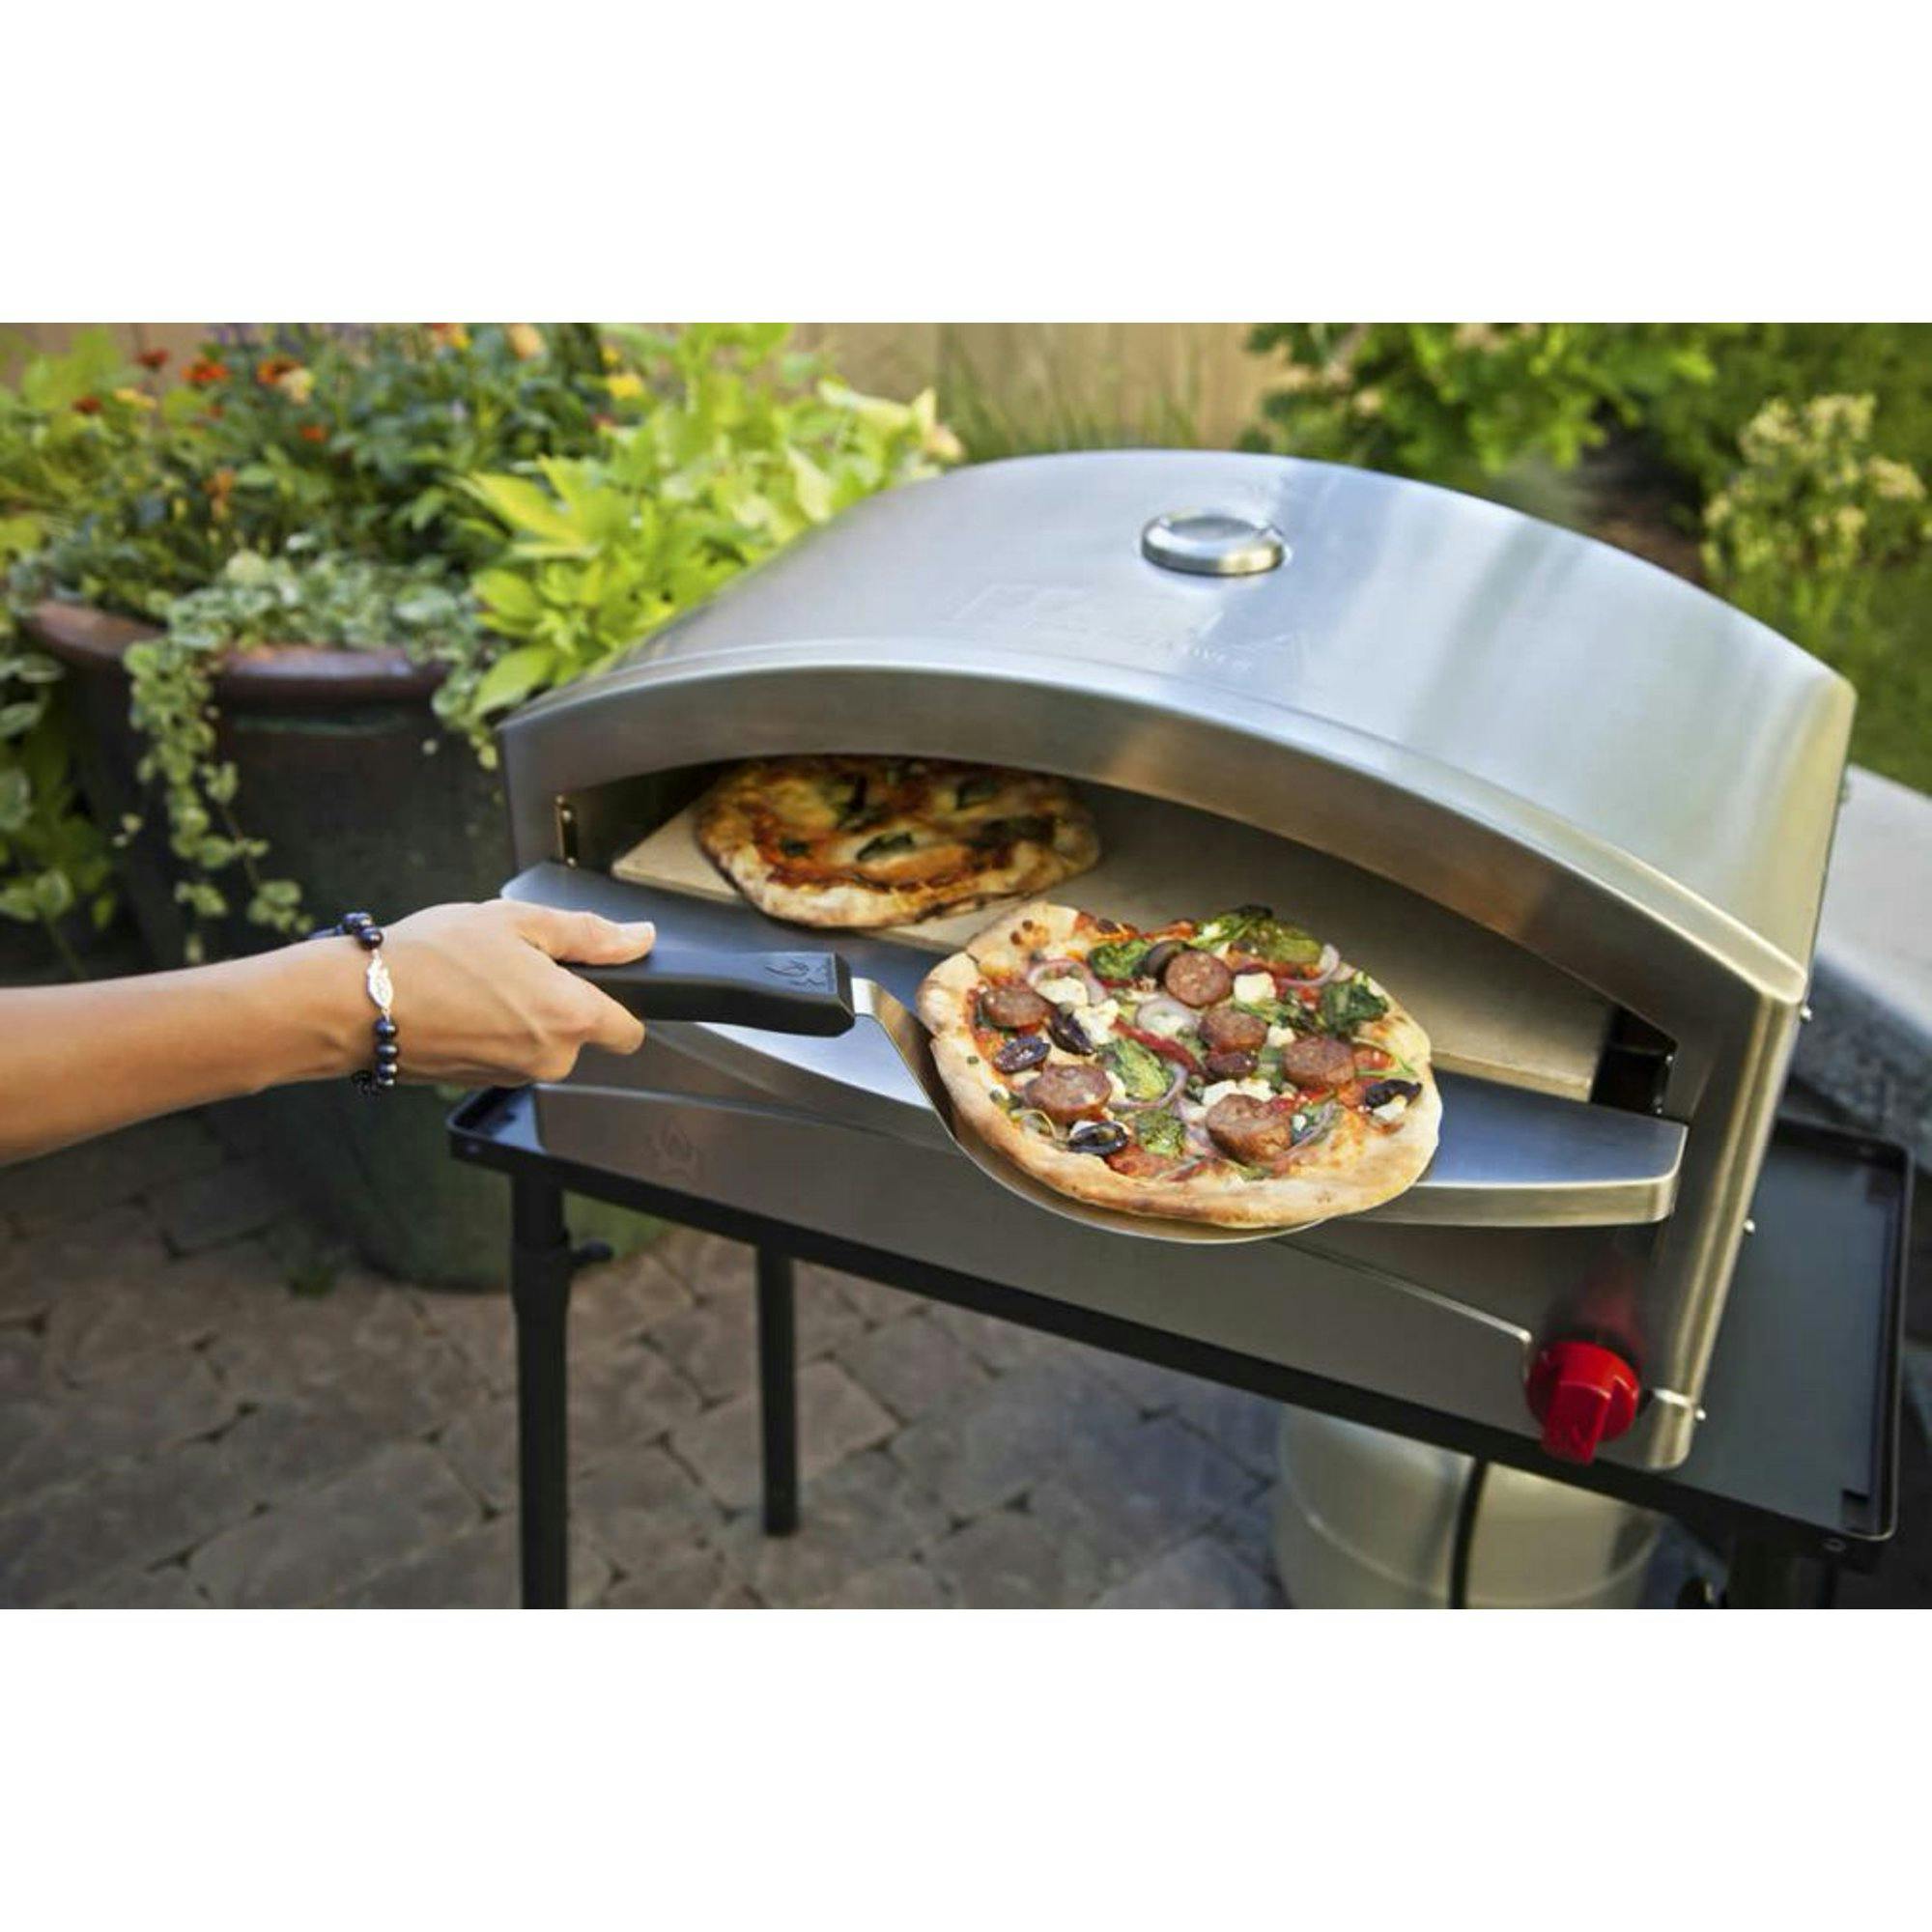 Pizza Accessories Kit and More | Camp Chef